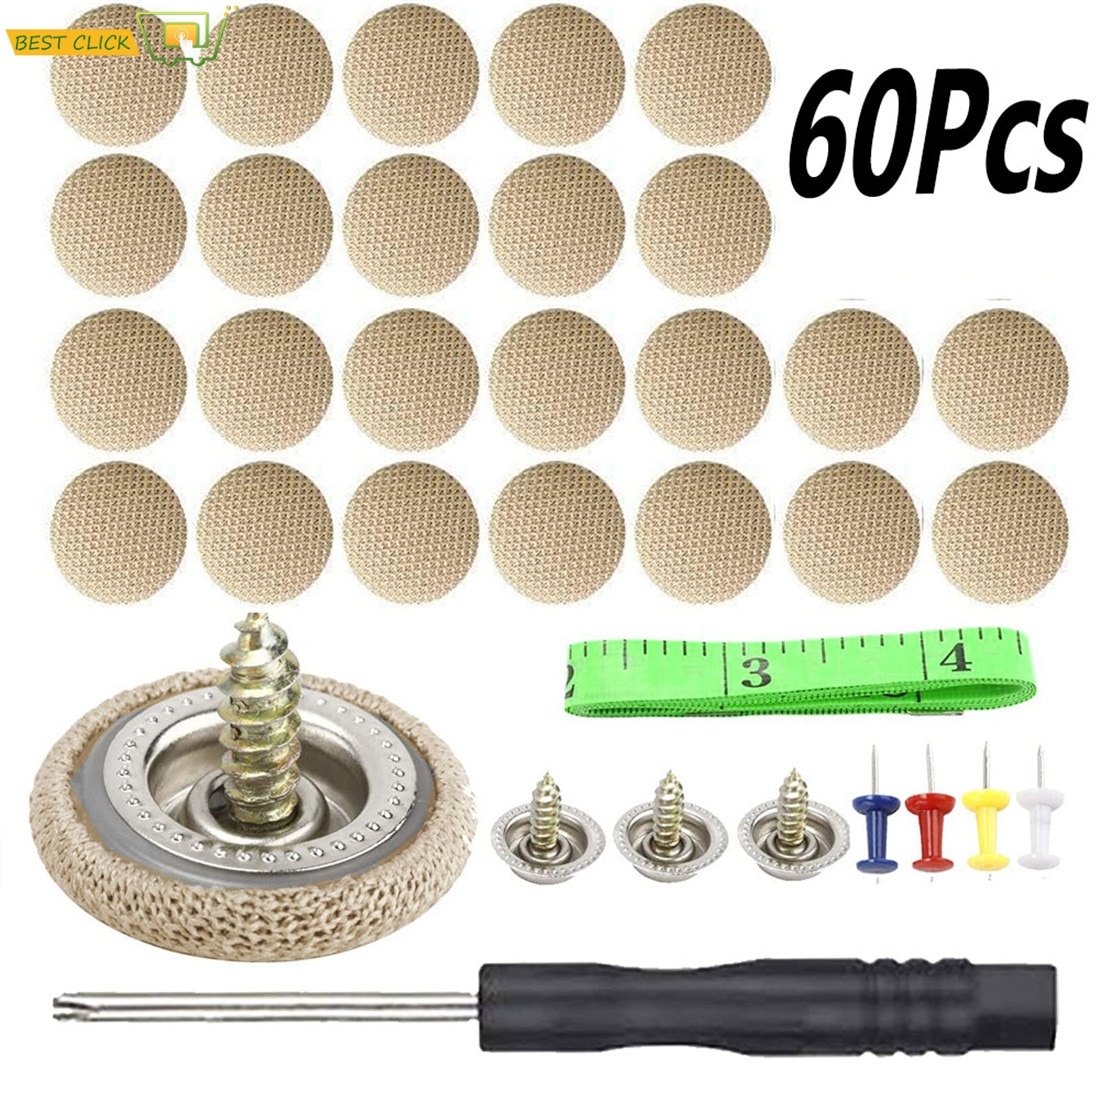 60 Pcs Car Headliner Repair Button, Auto Roof Snap Rivets Retainer Pin For Sagging Roof Ceiling Fix Car Interior Decorations